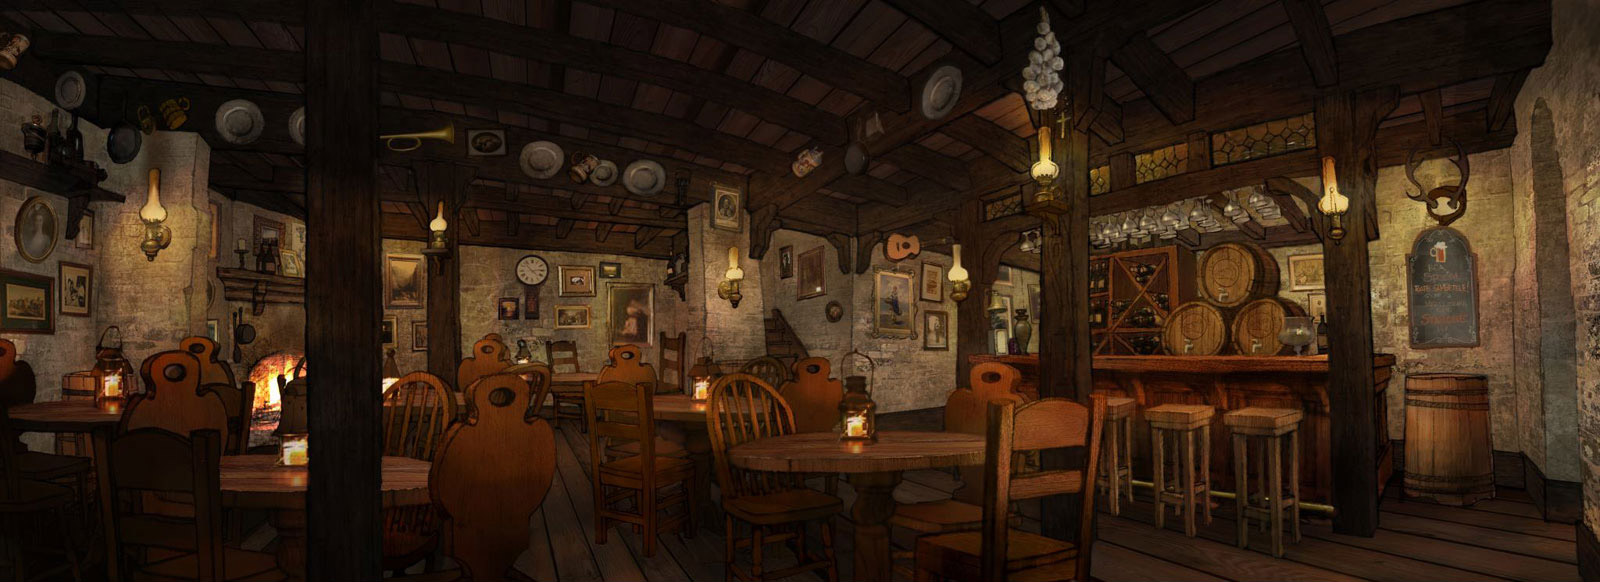 1000 images about iMedievali Tavern Interior on Pinterest